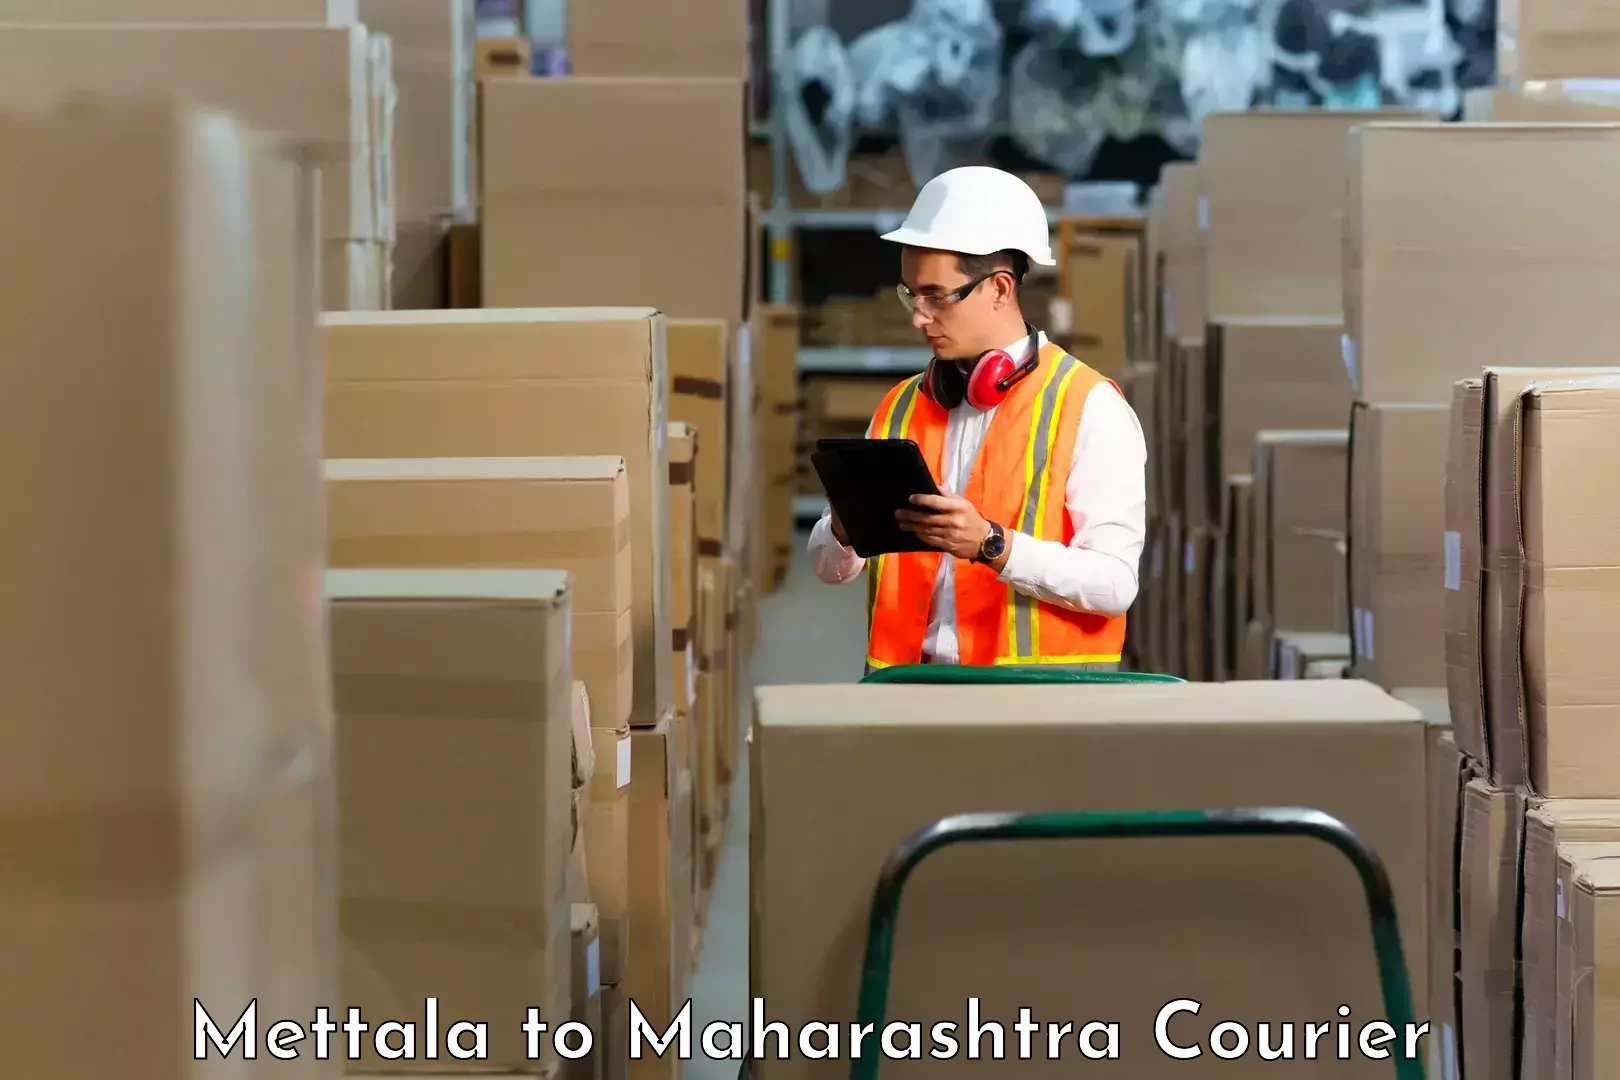 Subscription-based courier Mettala to Mahabaleshwar